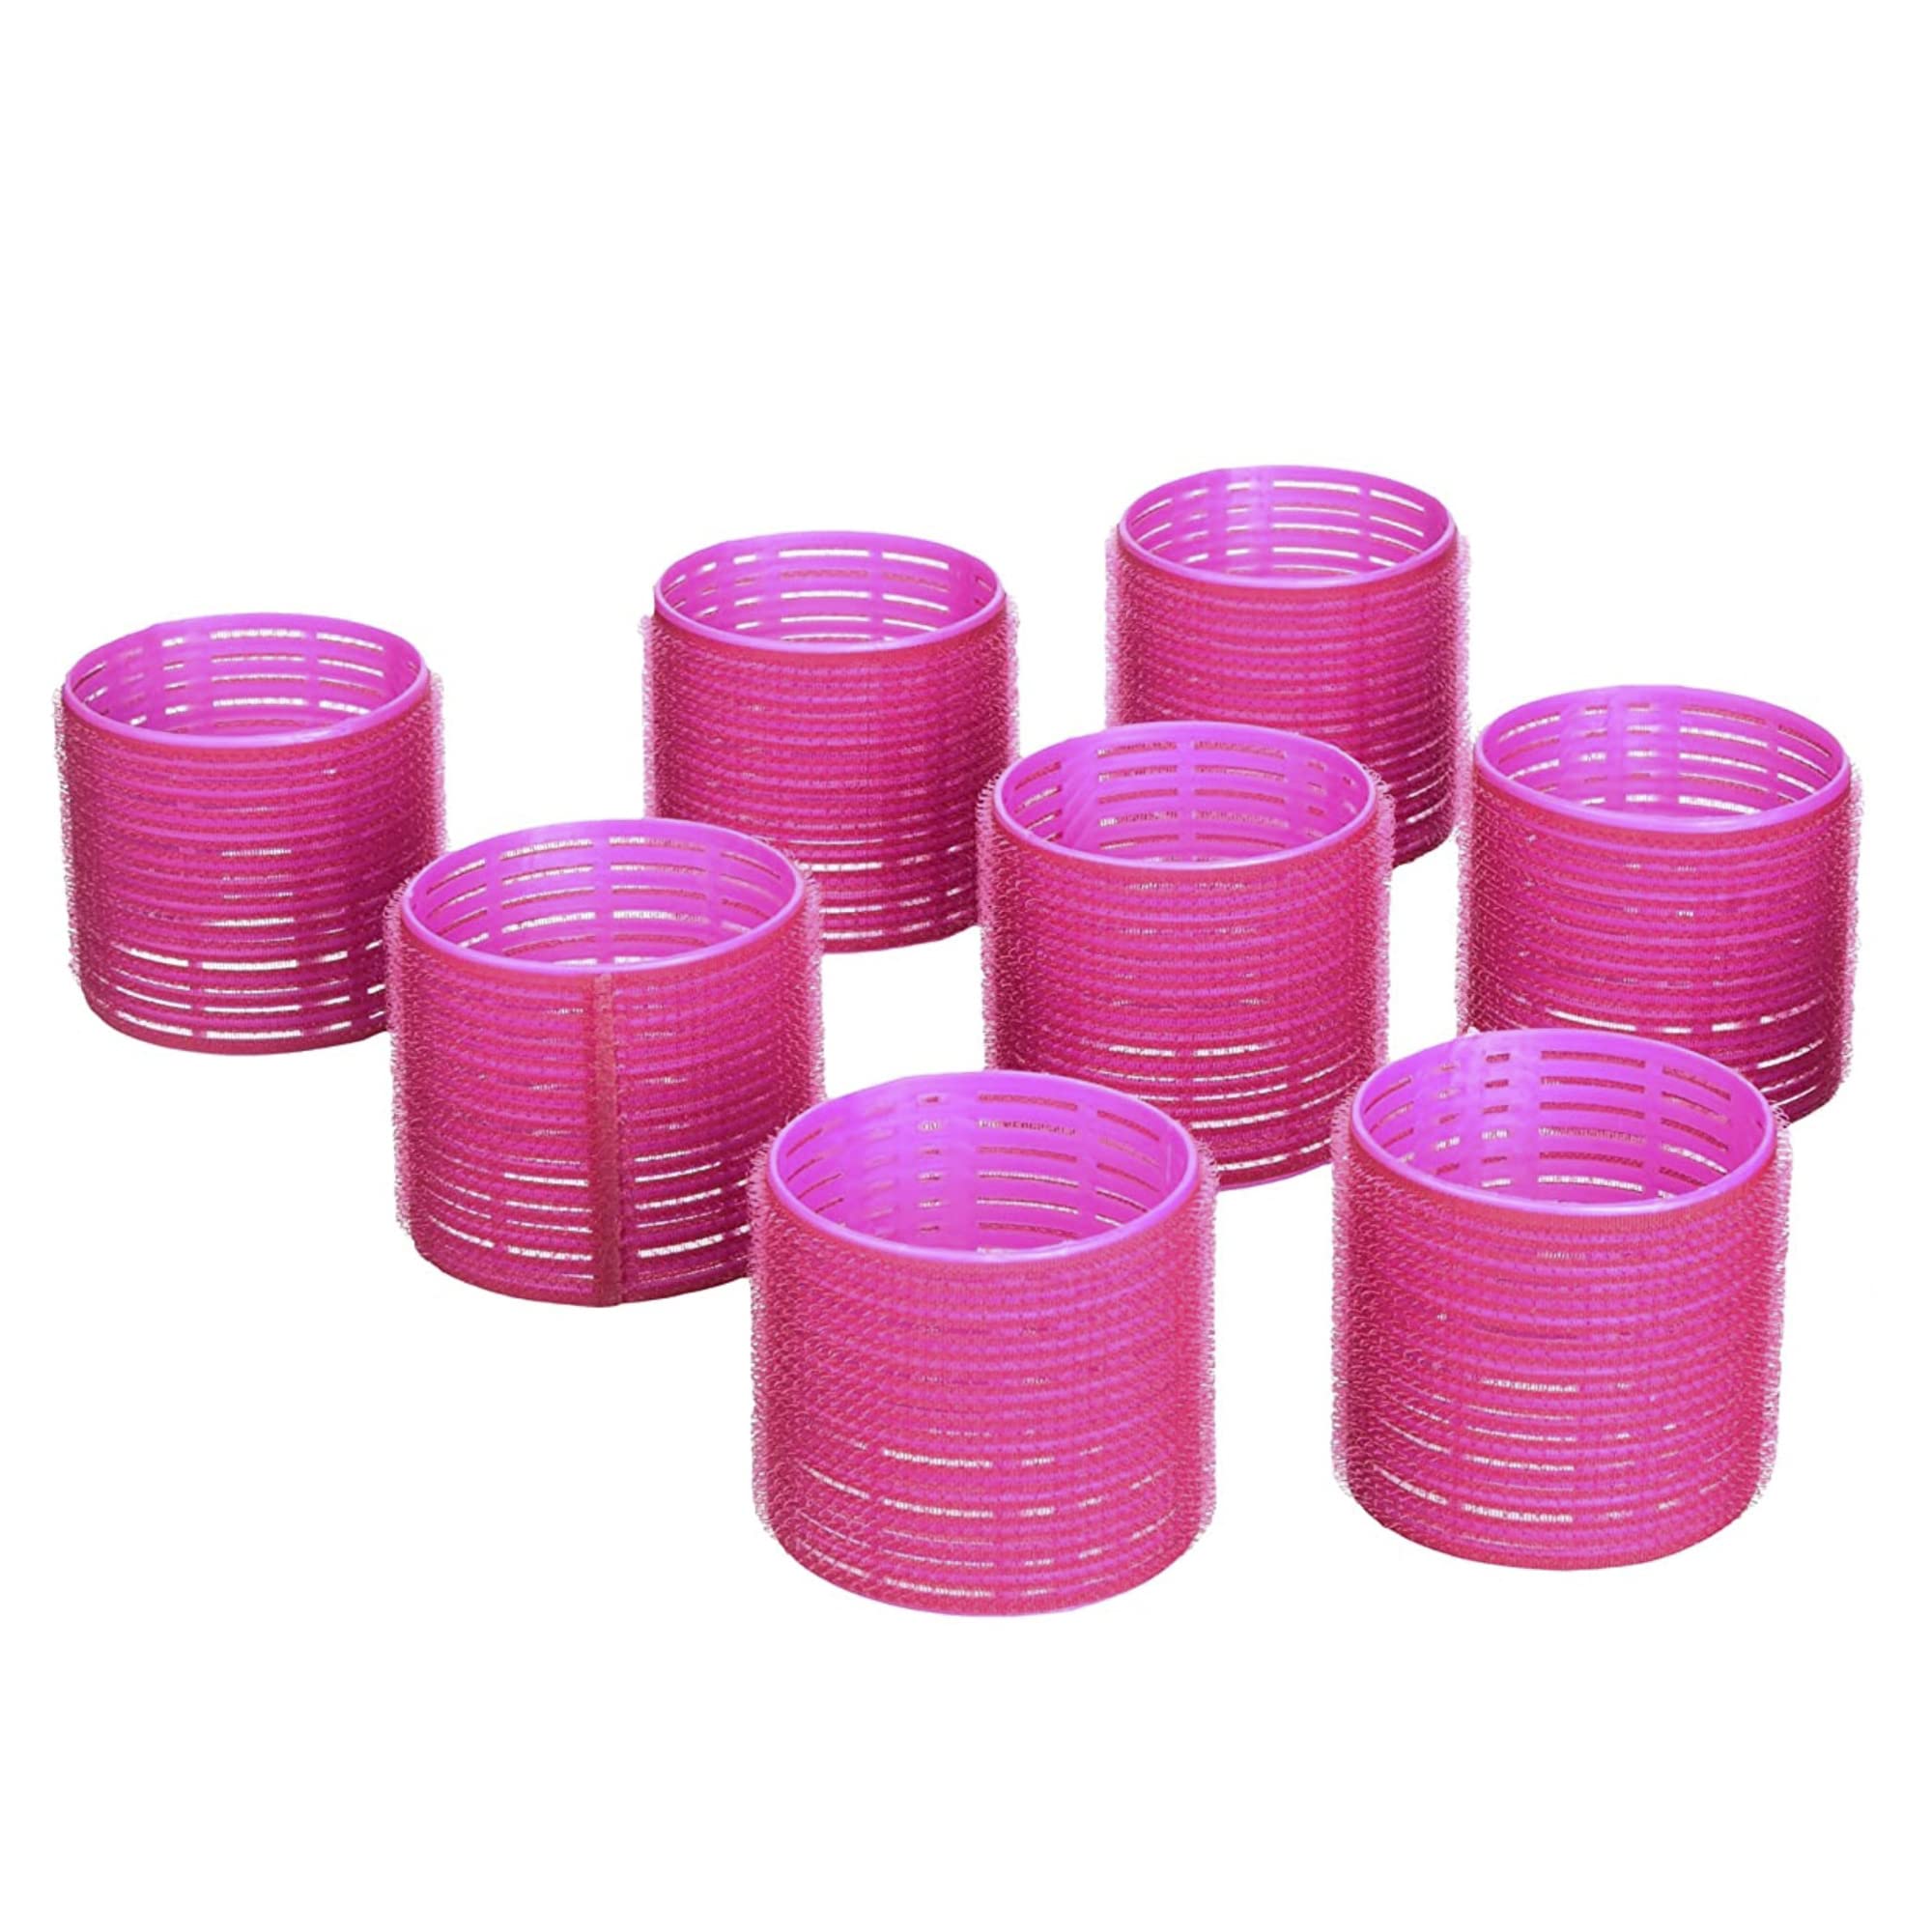 Conair Hair Rollers, Hair Curlers in Extra-Large Size, Hot Pink, 9 Pack  with Storage Bag